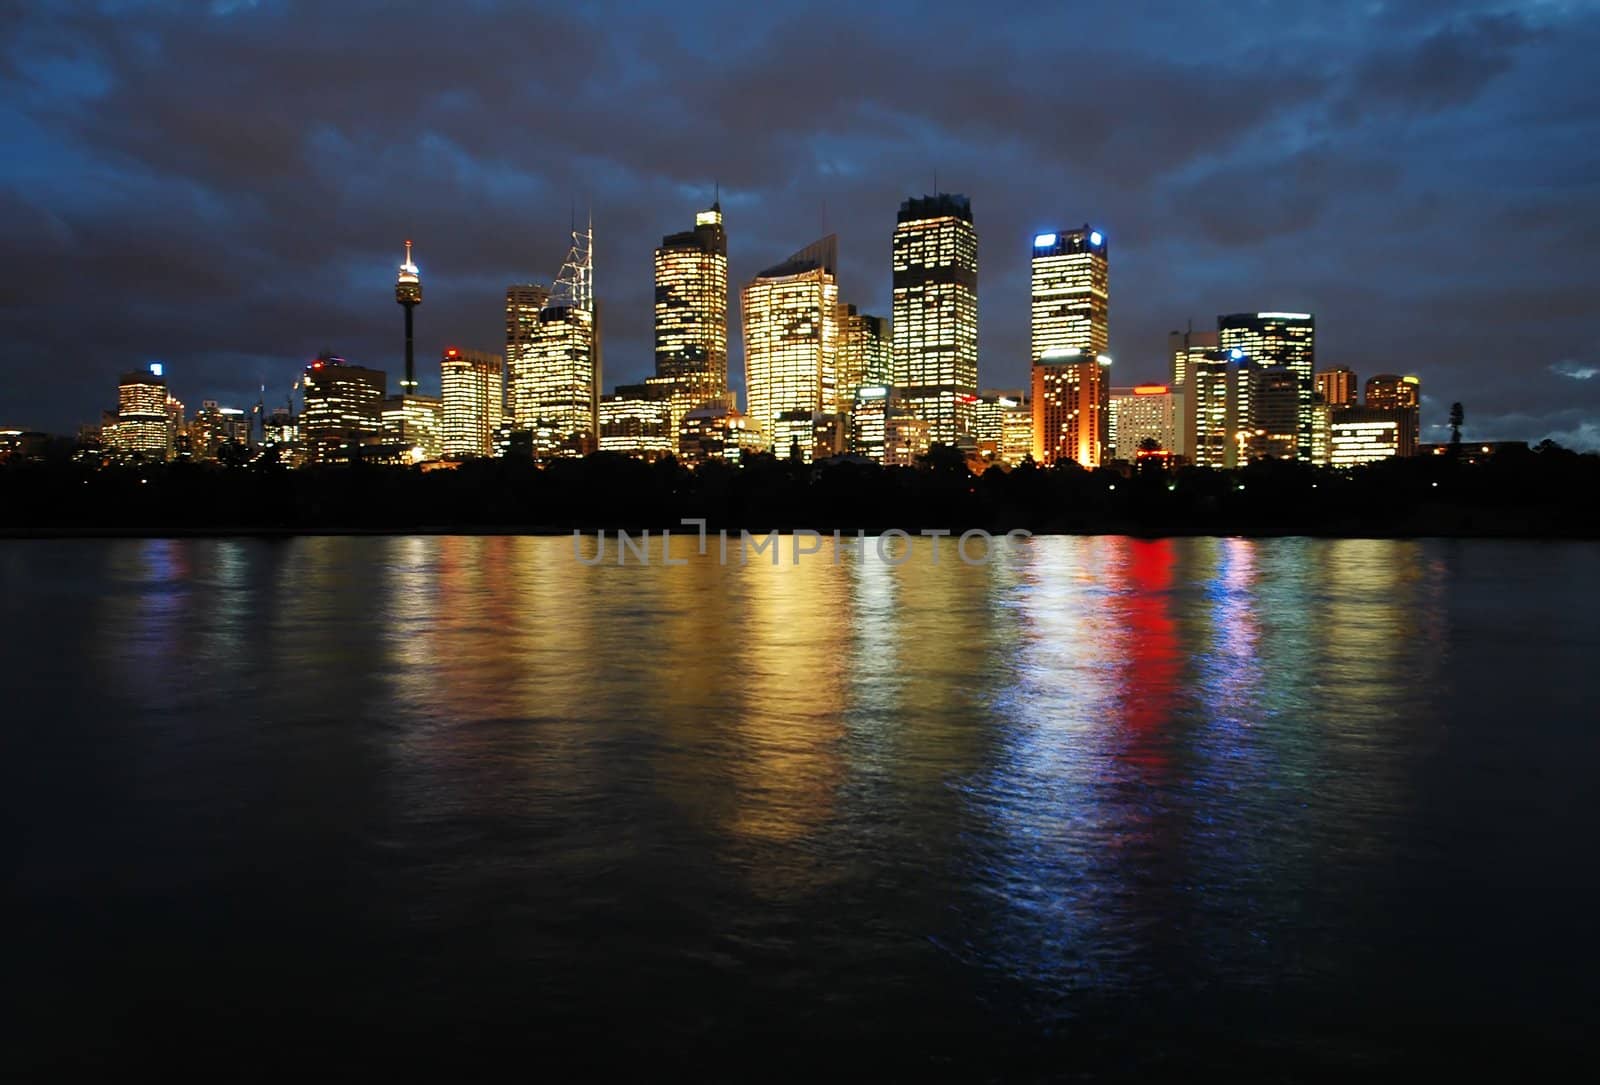 sydney CBD at night, skyscrapers reflection in water, photo taken from Royal Botanic Gardens